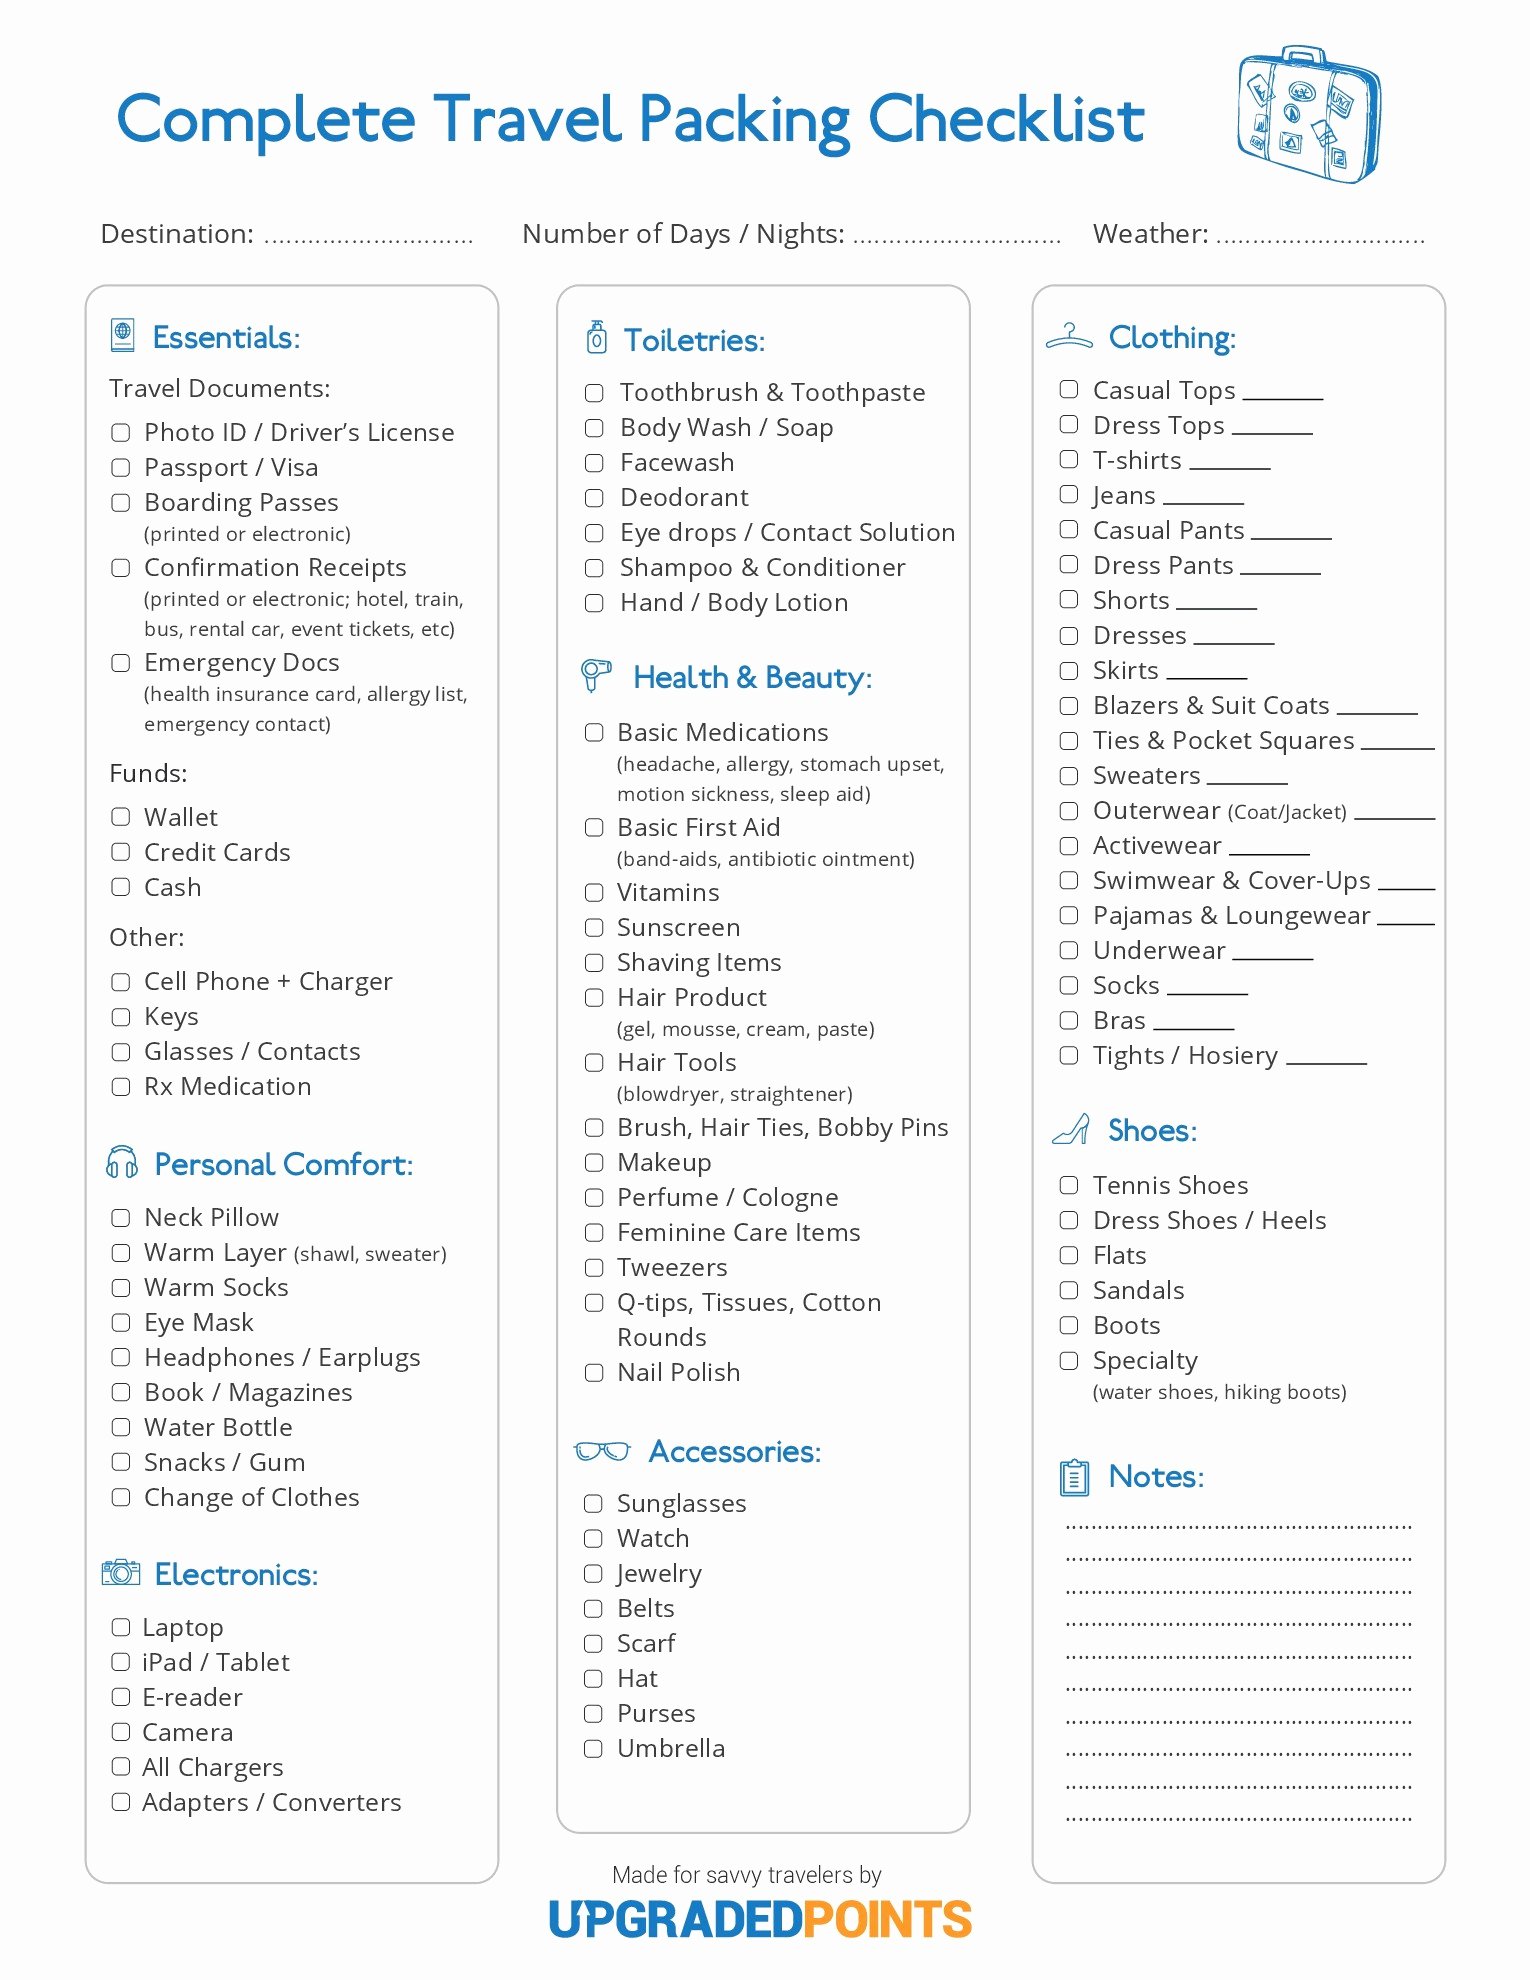 Ultimate Cruise Packing List Beautiful Easy Printable Travel Packing Checklist 30 Best Packing